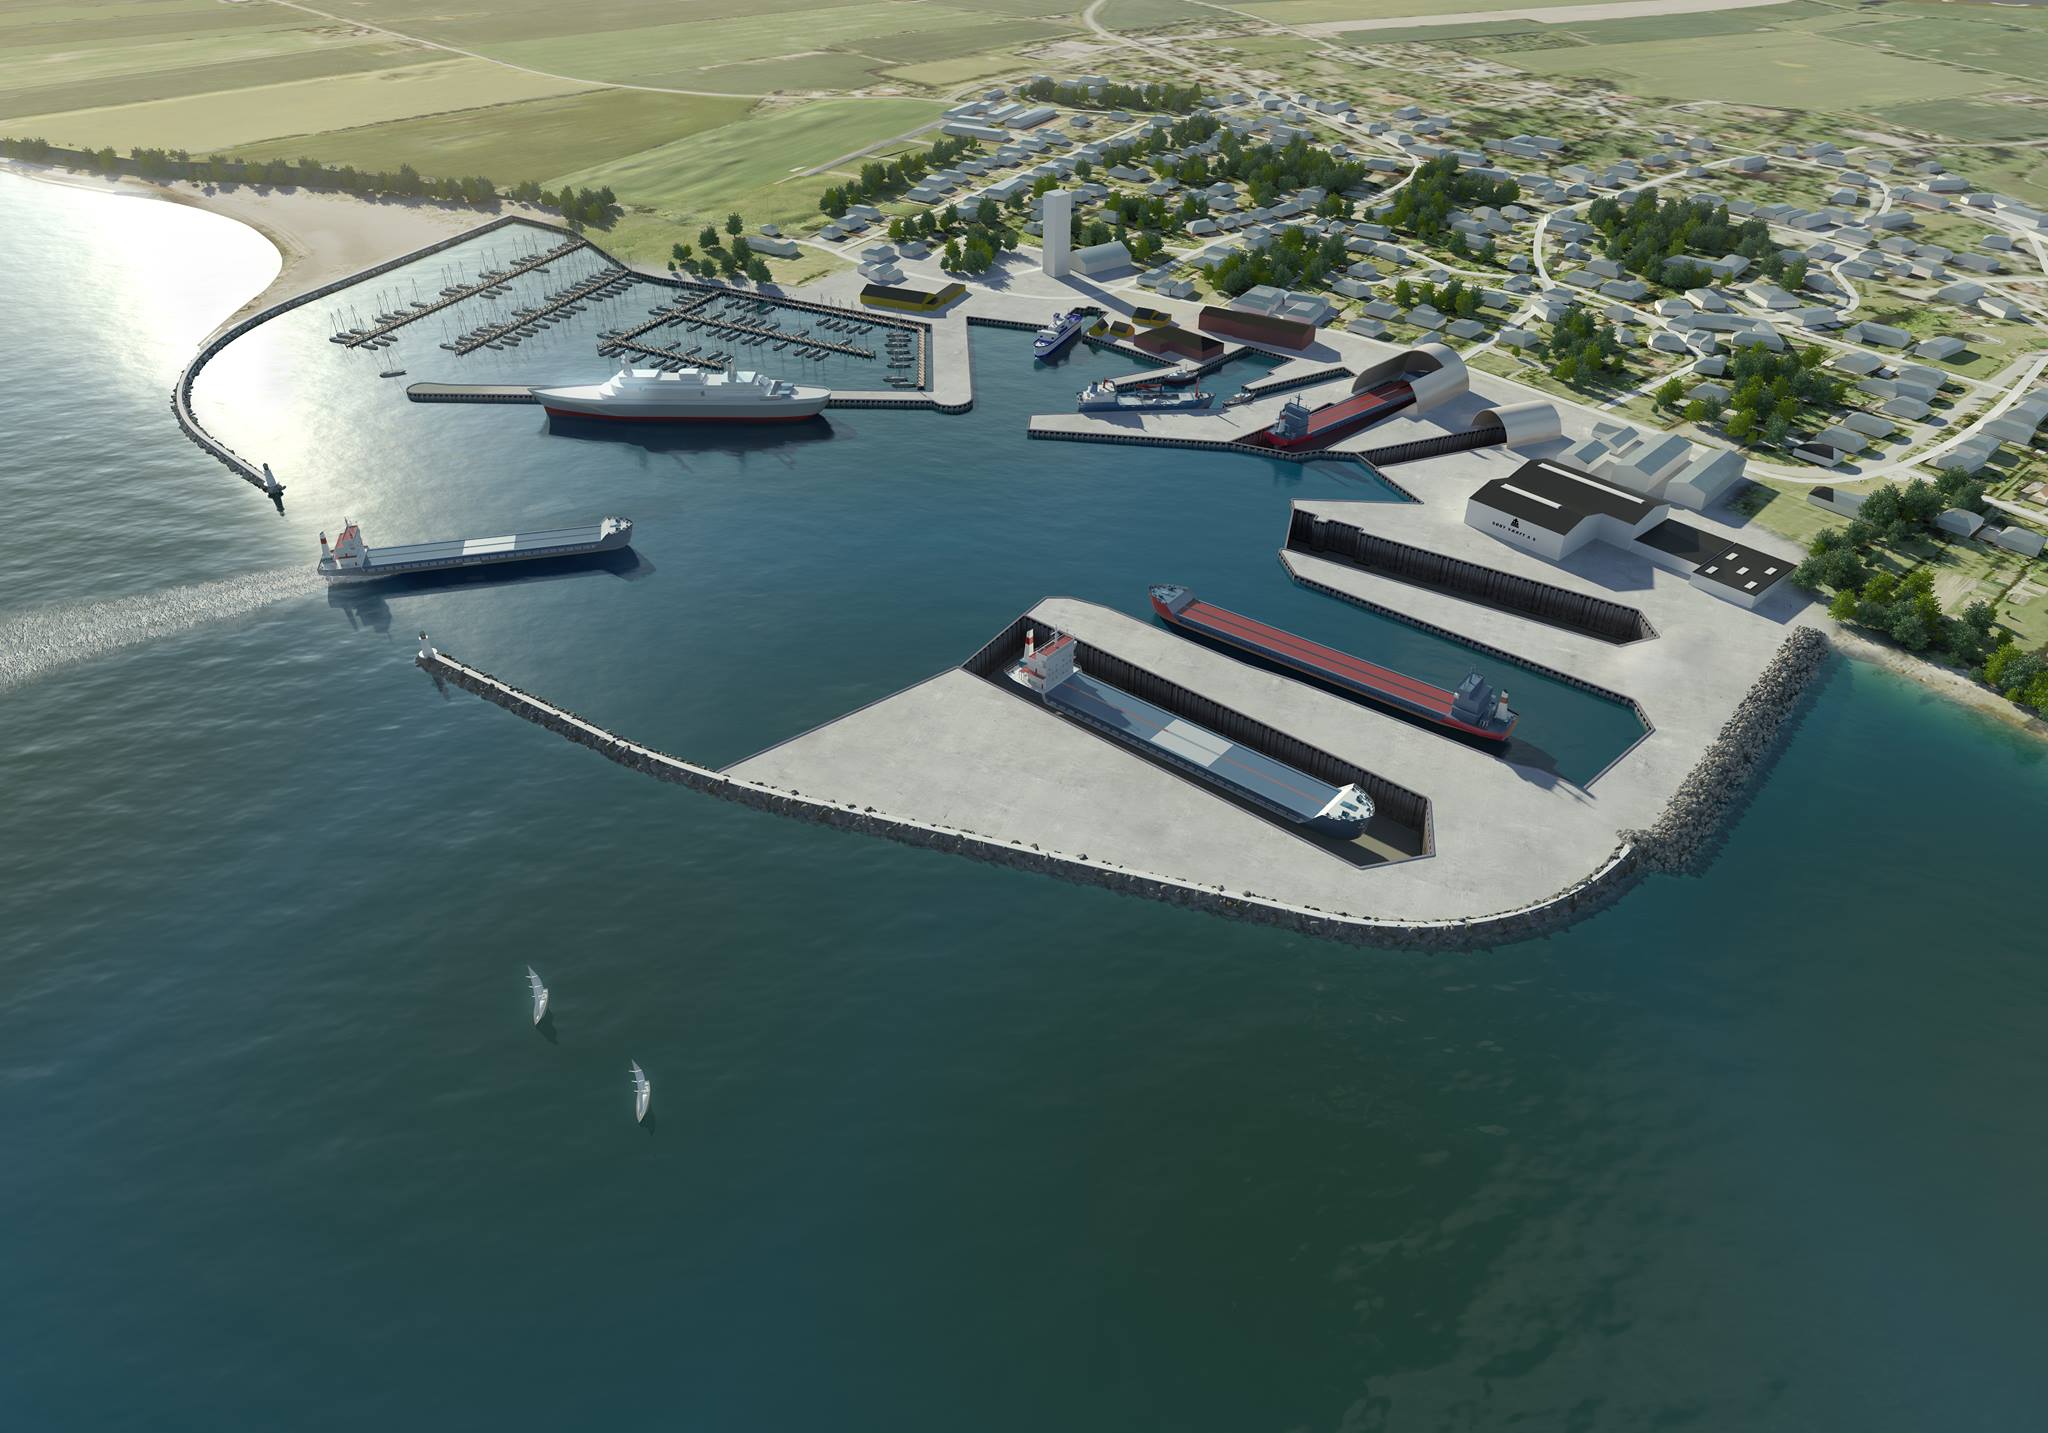 A 3D map showing future plans for the Port of Søby